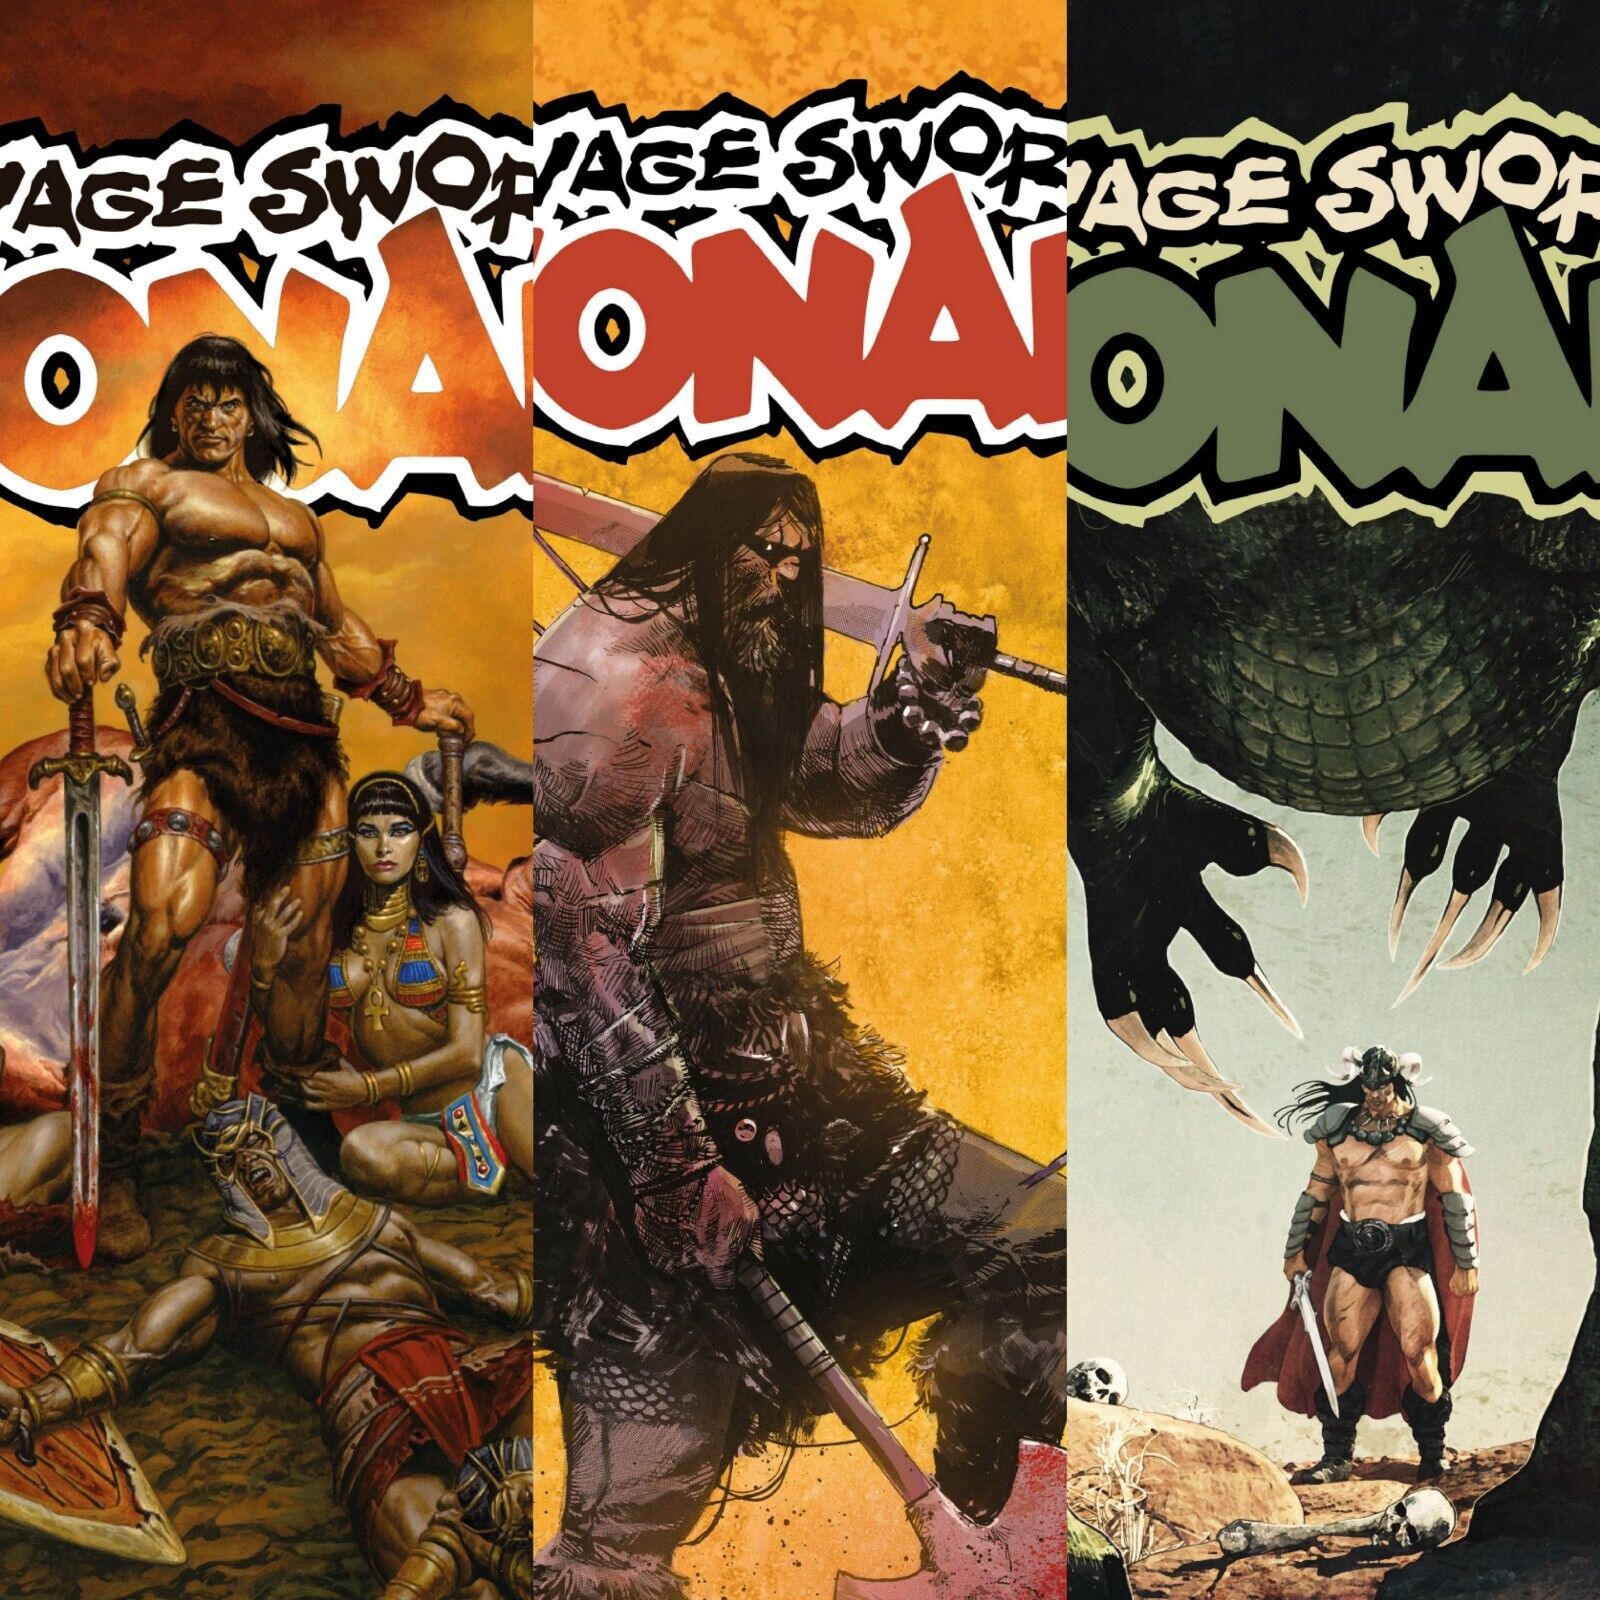 SAVAGE SWORD OF CONAN #1 (OF 6)  A/B/C - Lot of 3 - Bagged &Boarded 